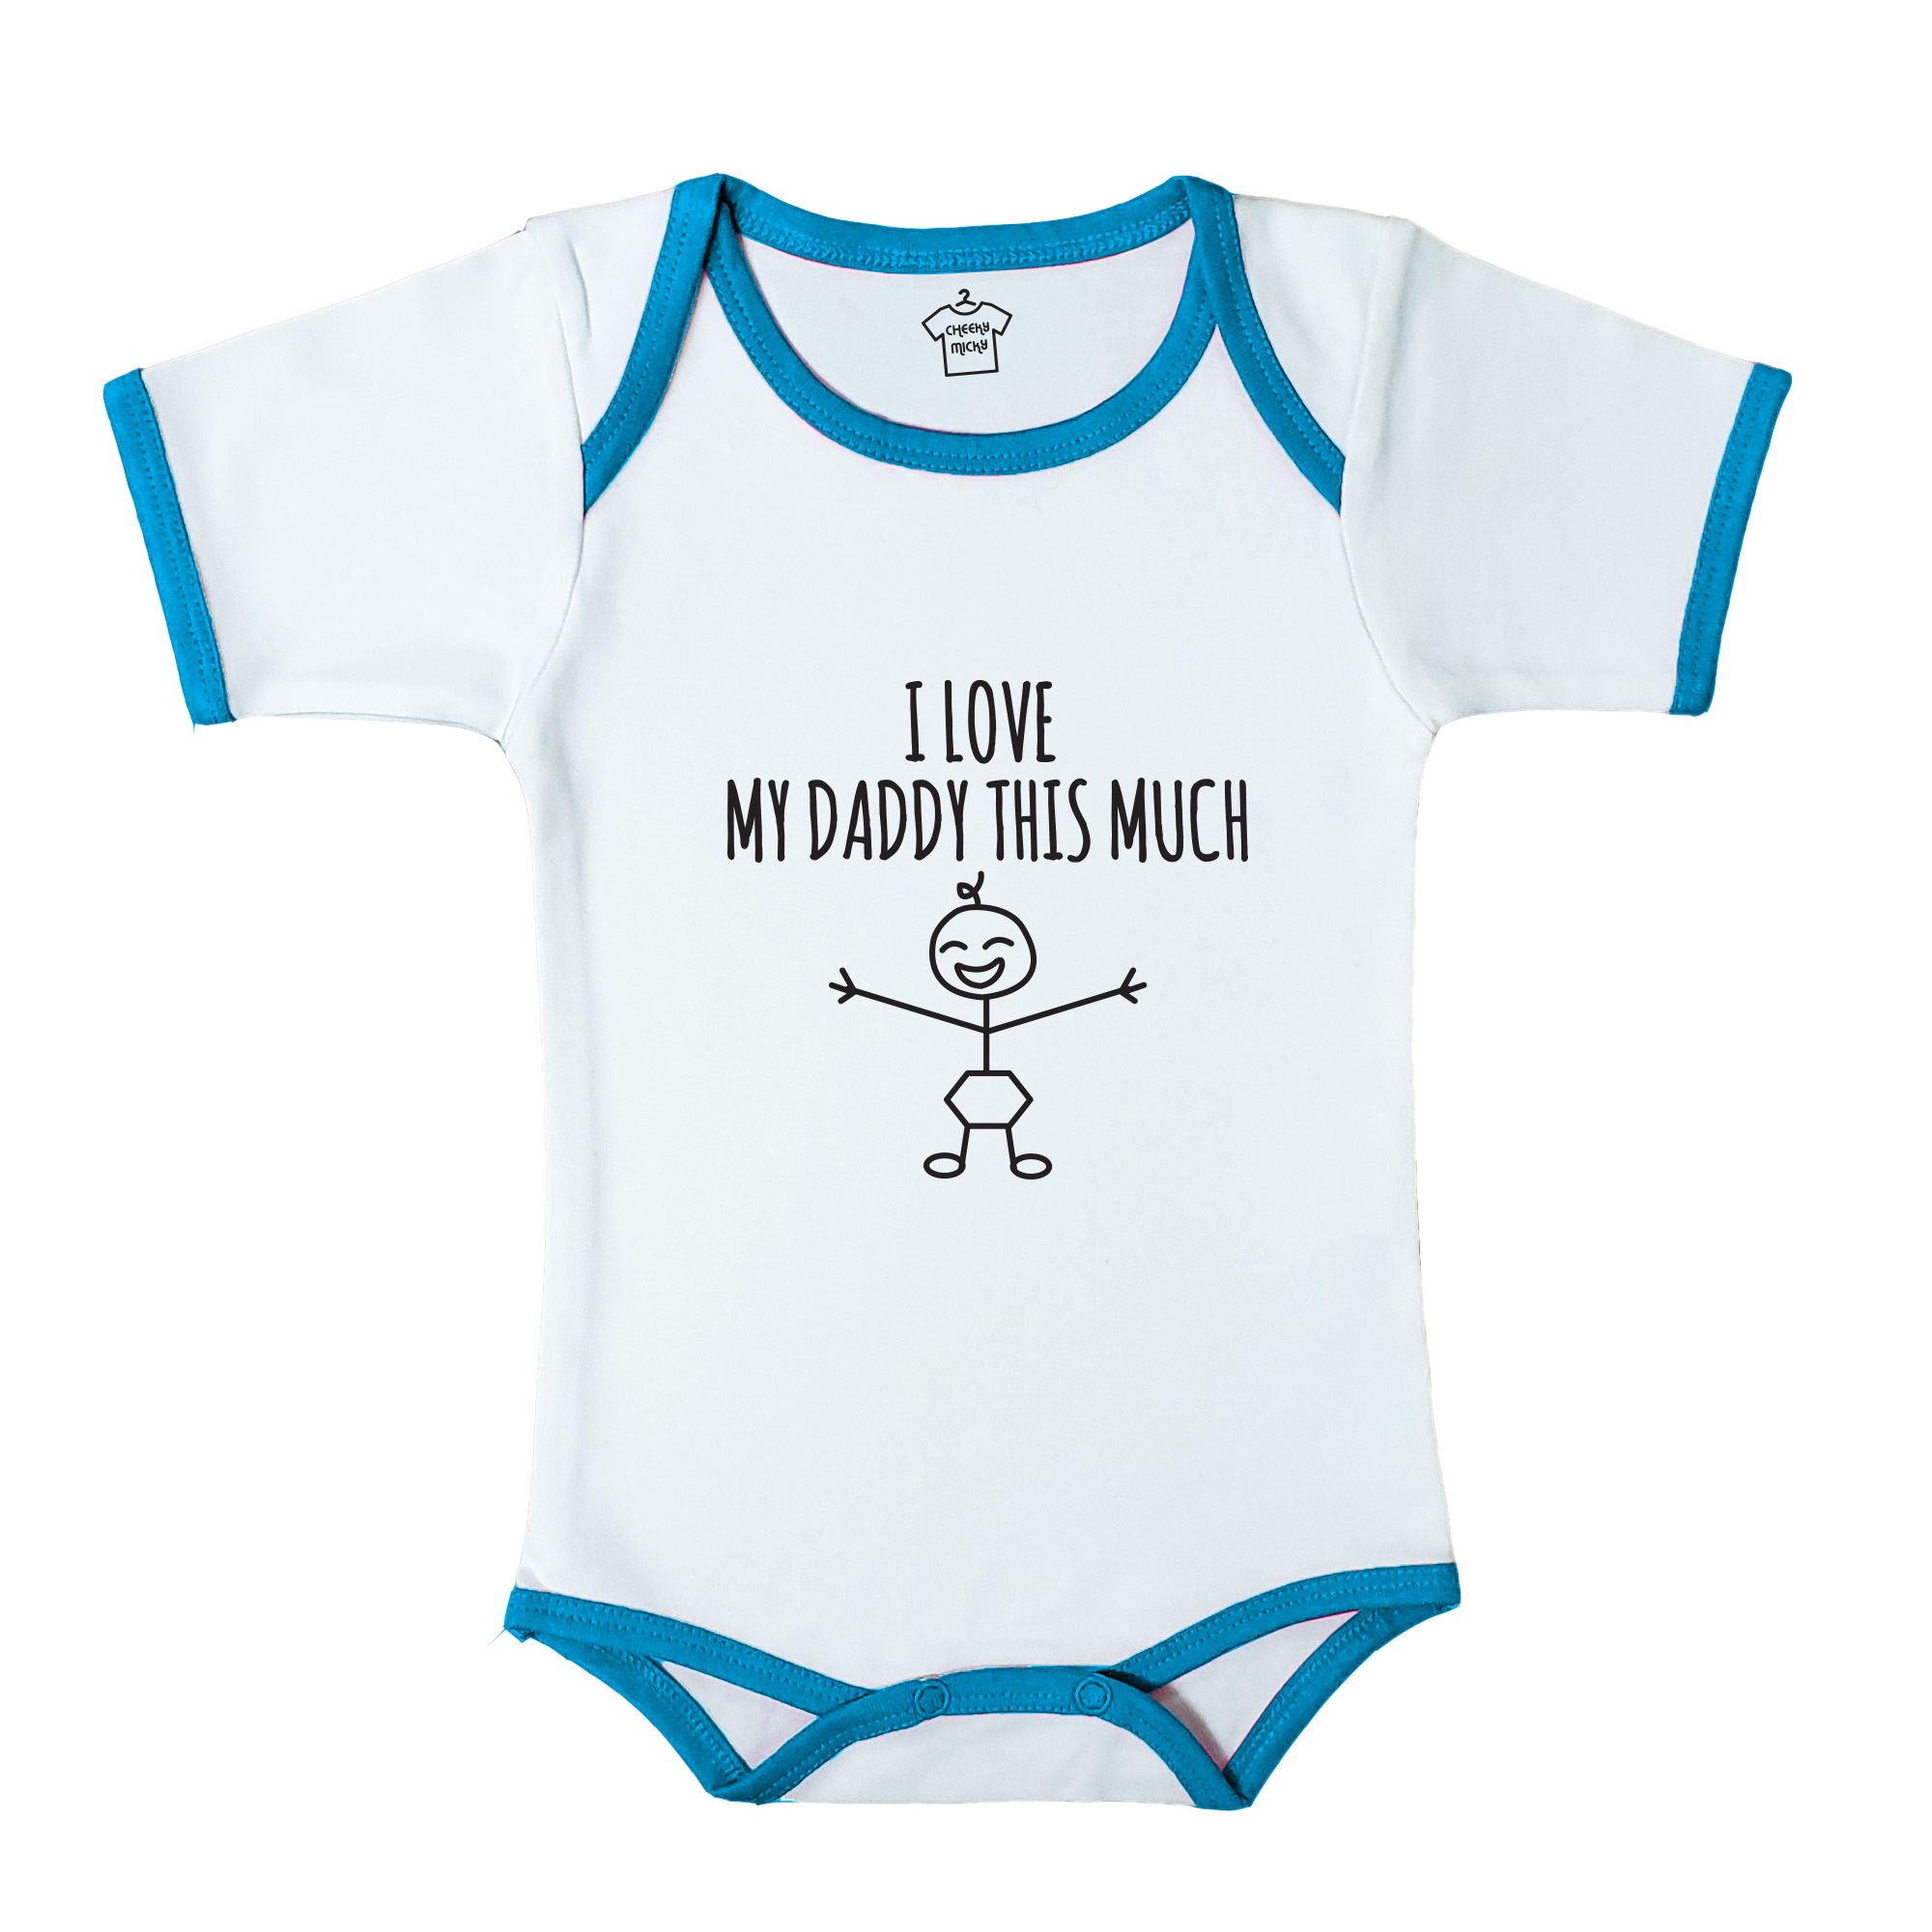 Soft baby body suit with blue trim, 100% cotton, machine washable. Age 6-12 months. Print: I Heart My Daddy This Much.